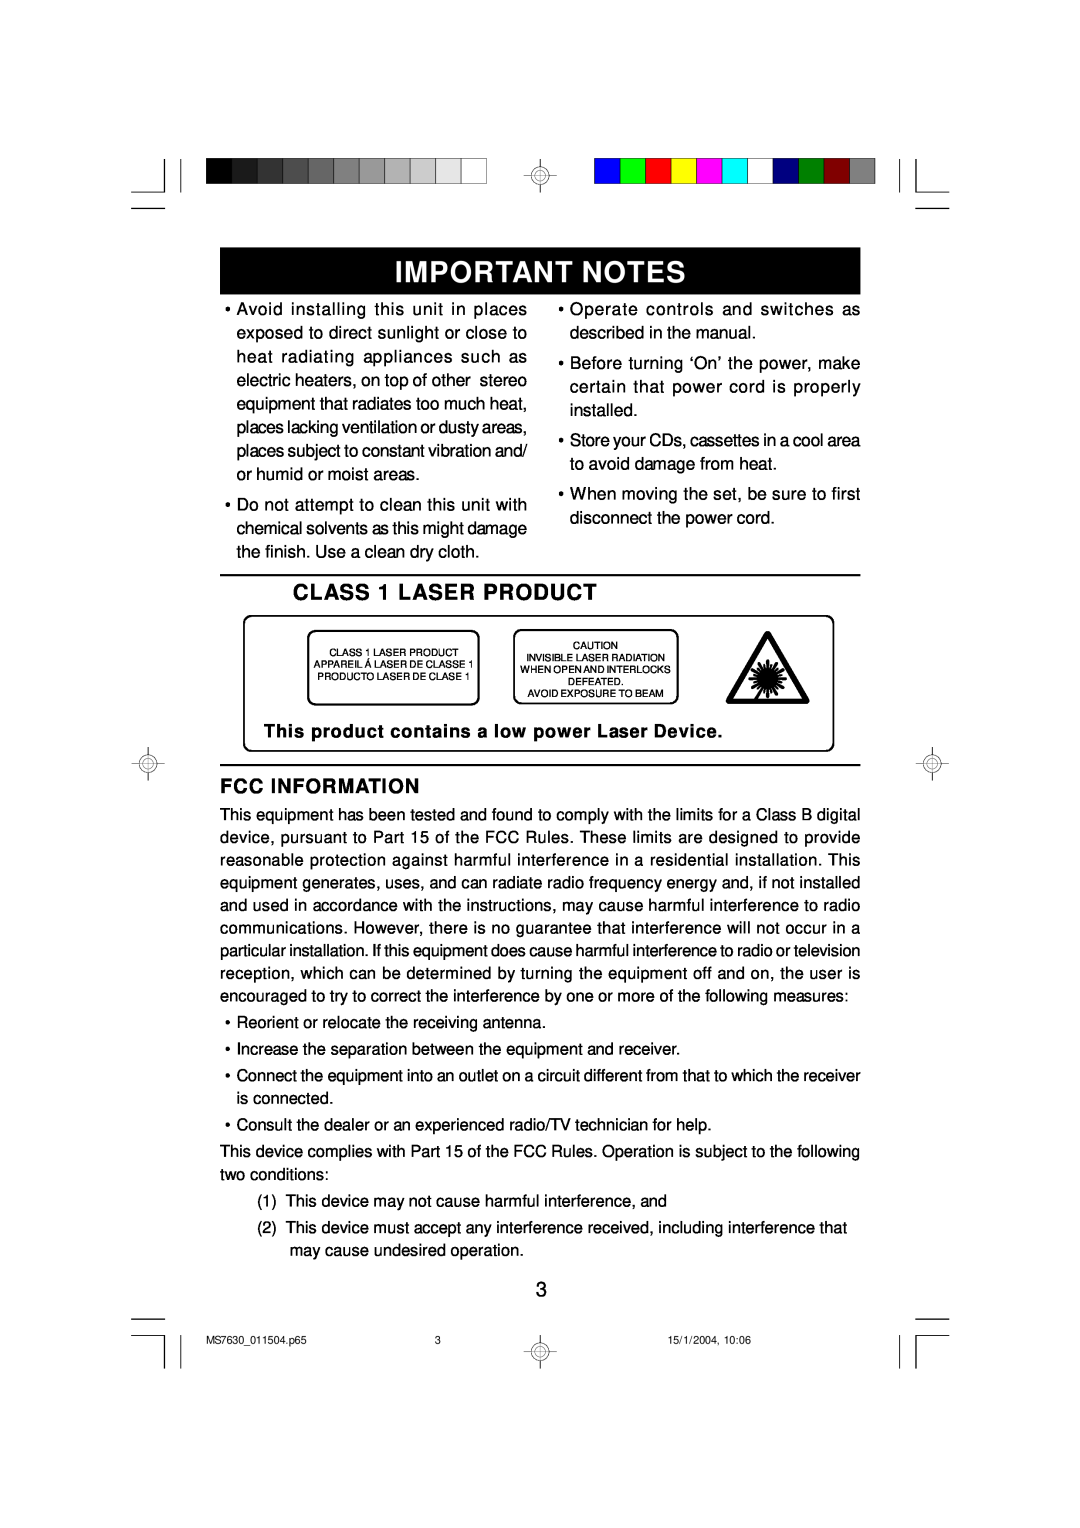 Emerson MS7630 Important Notes, CLASS 1 LASER PRODUCT, Fcc Information, This product contains a low power Laser Device 